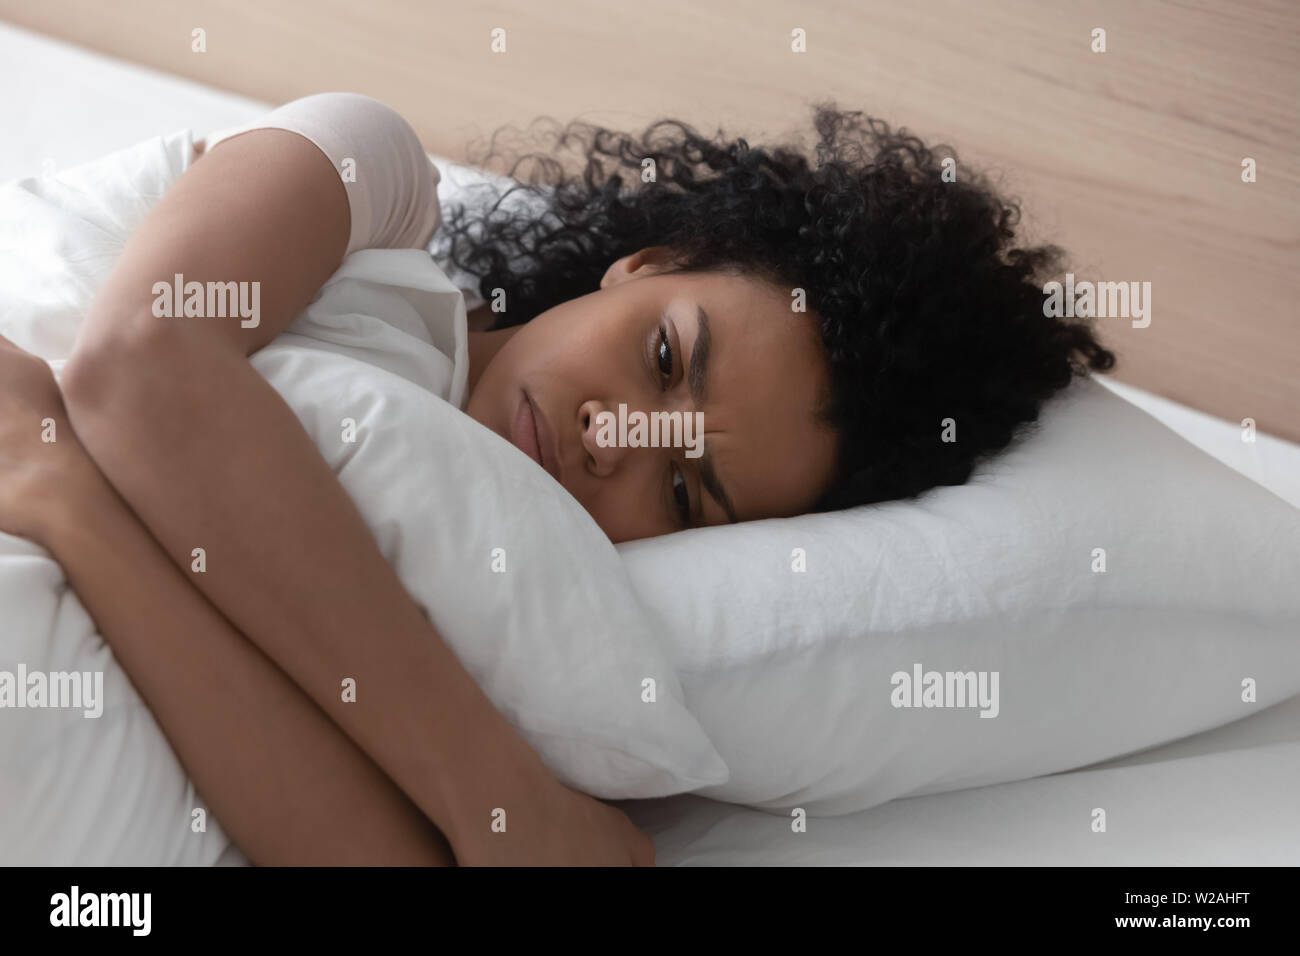 Sad depressed african woman hugging pillow lying in bed alone Stock Photo